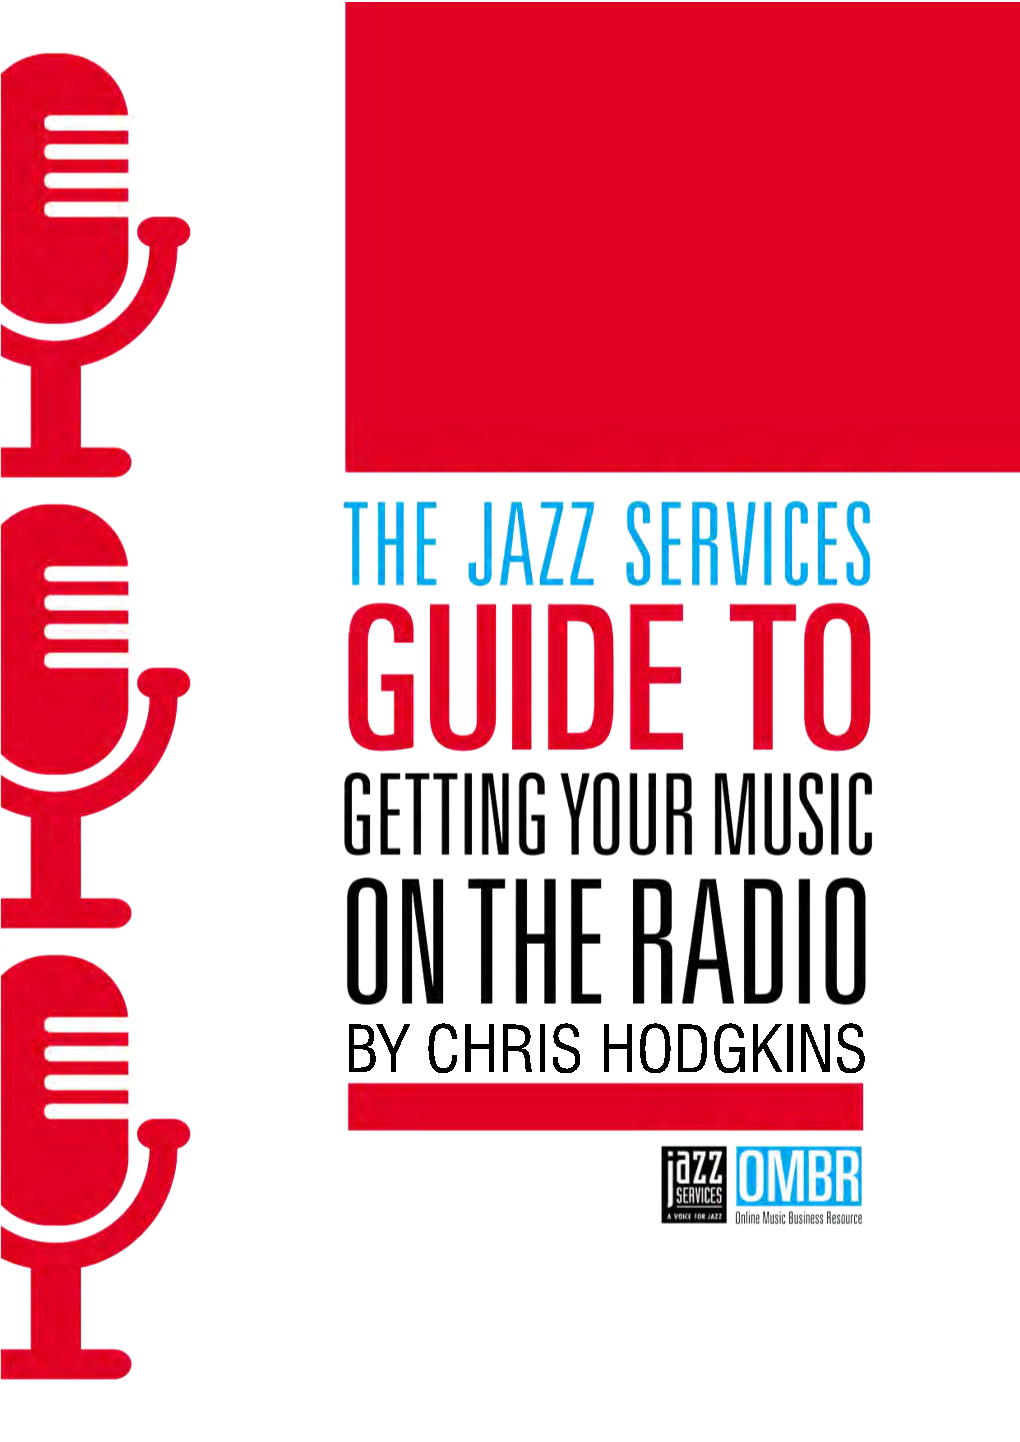 Jazz Services Guide to Getting Your Music on the Radio